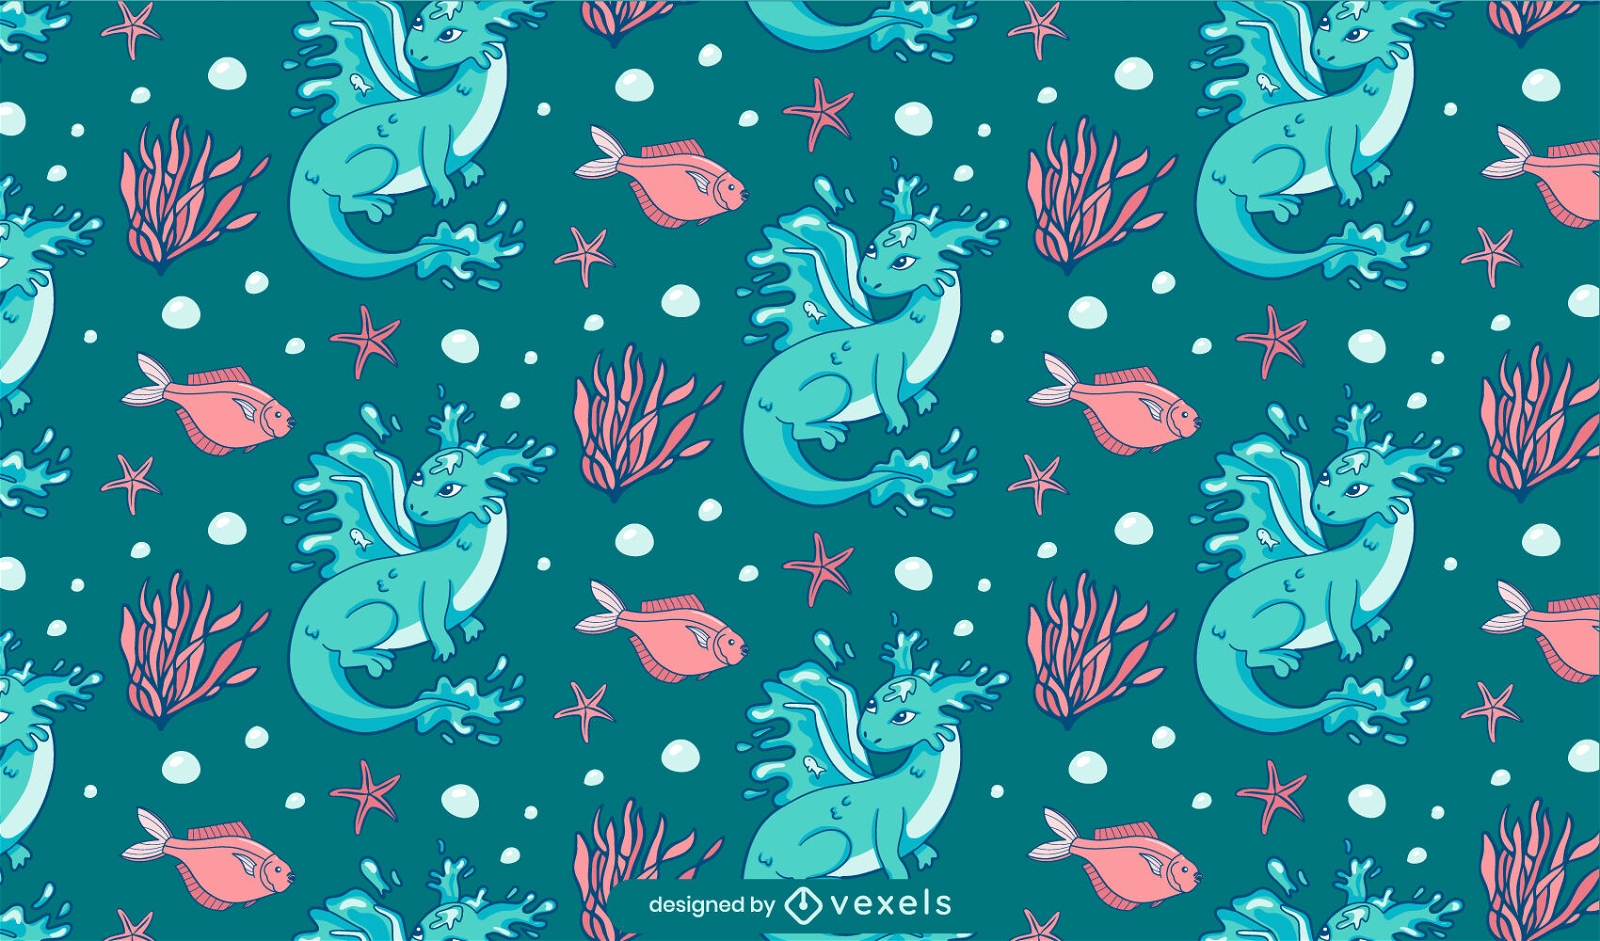 Water dragon and fish pattern design